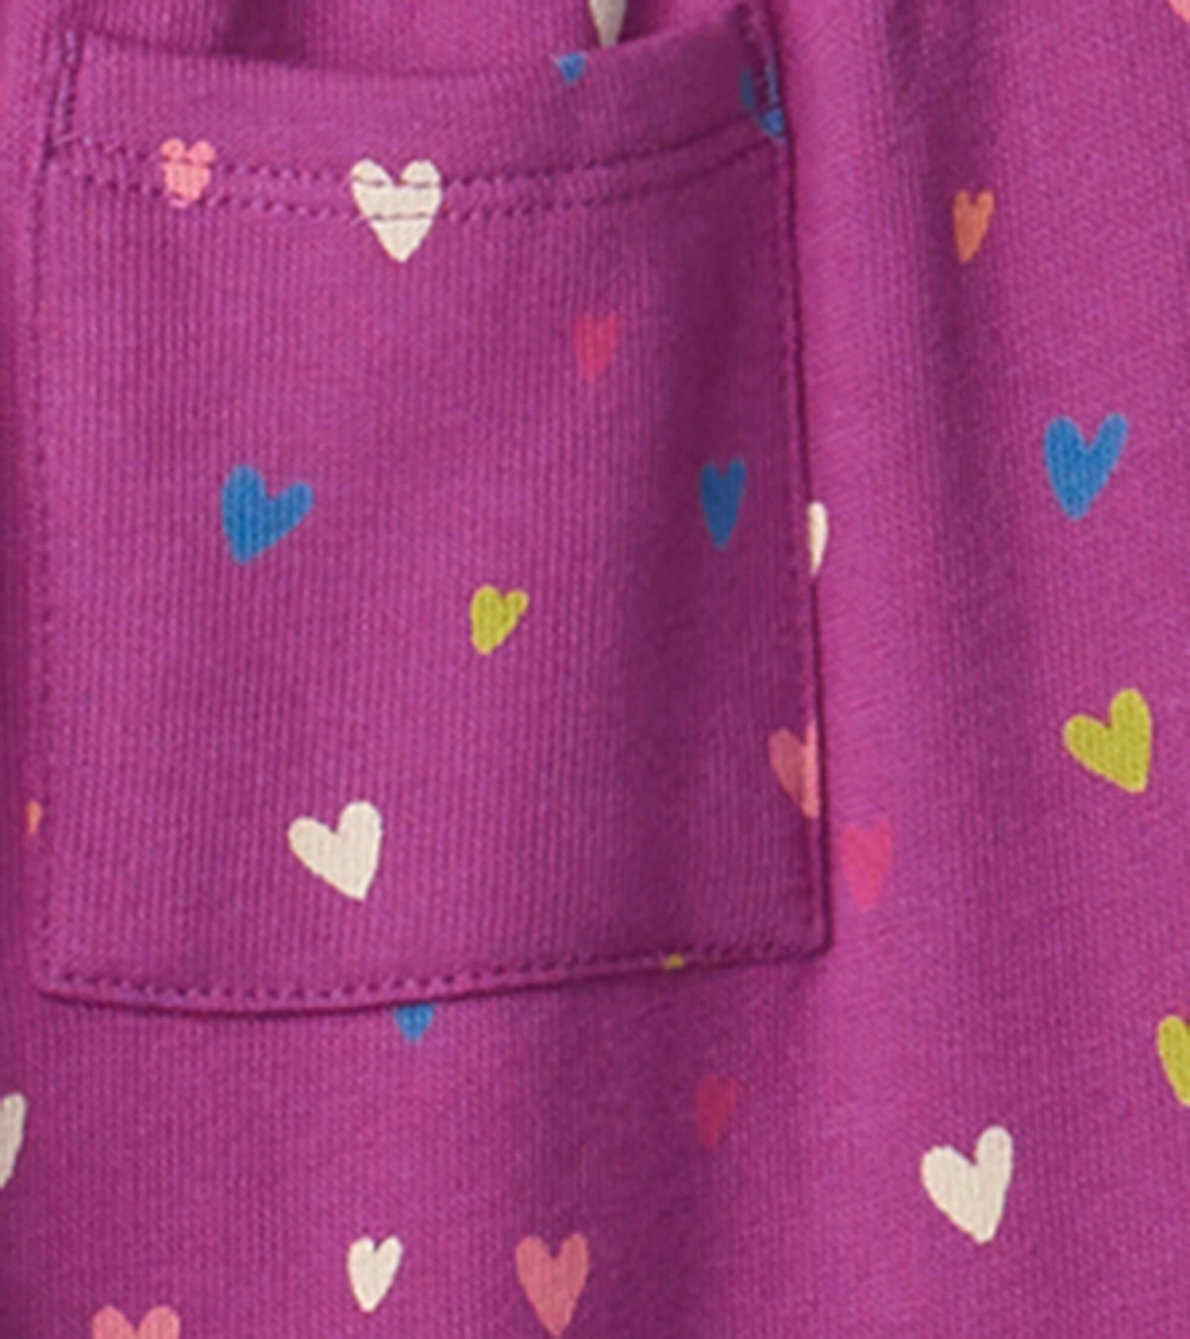 View larger image of Girls Jelly Bean Heart Cuffed Track Pants